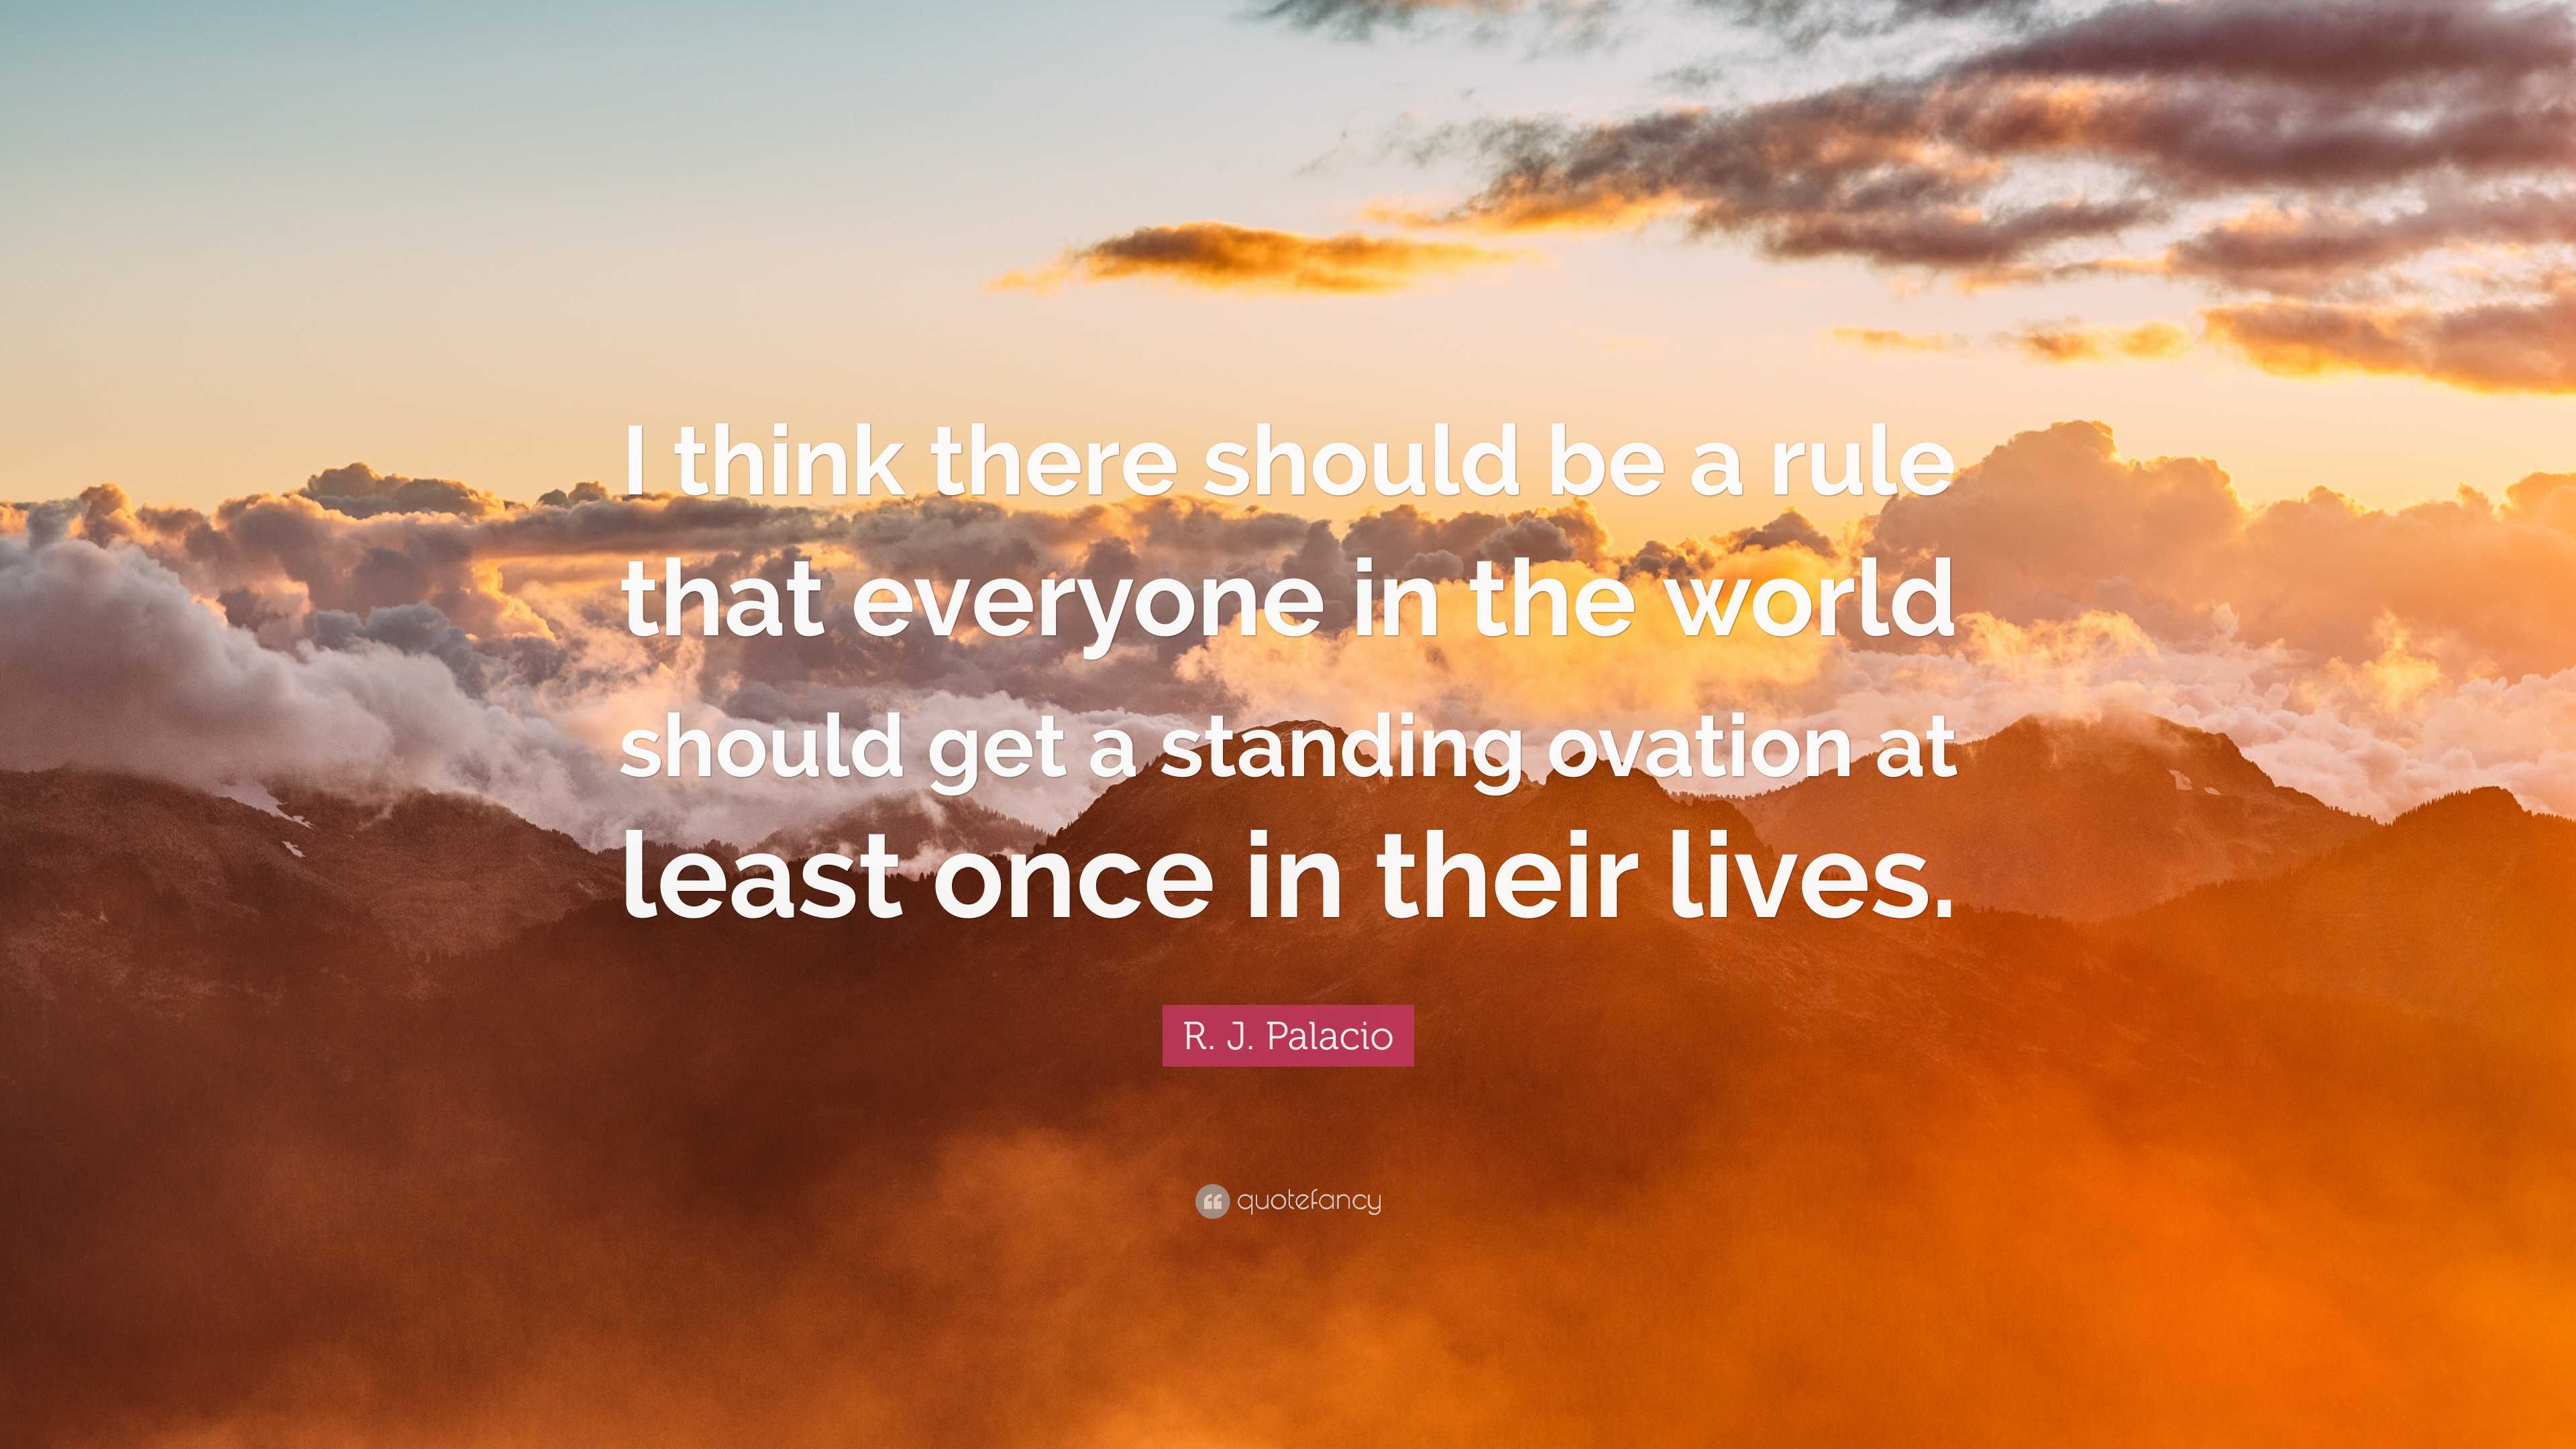 R. J. Palacio Quote: “I think there should be a rule that everyone in ...